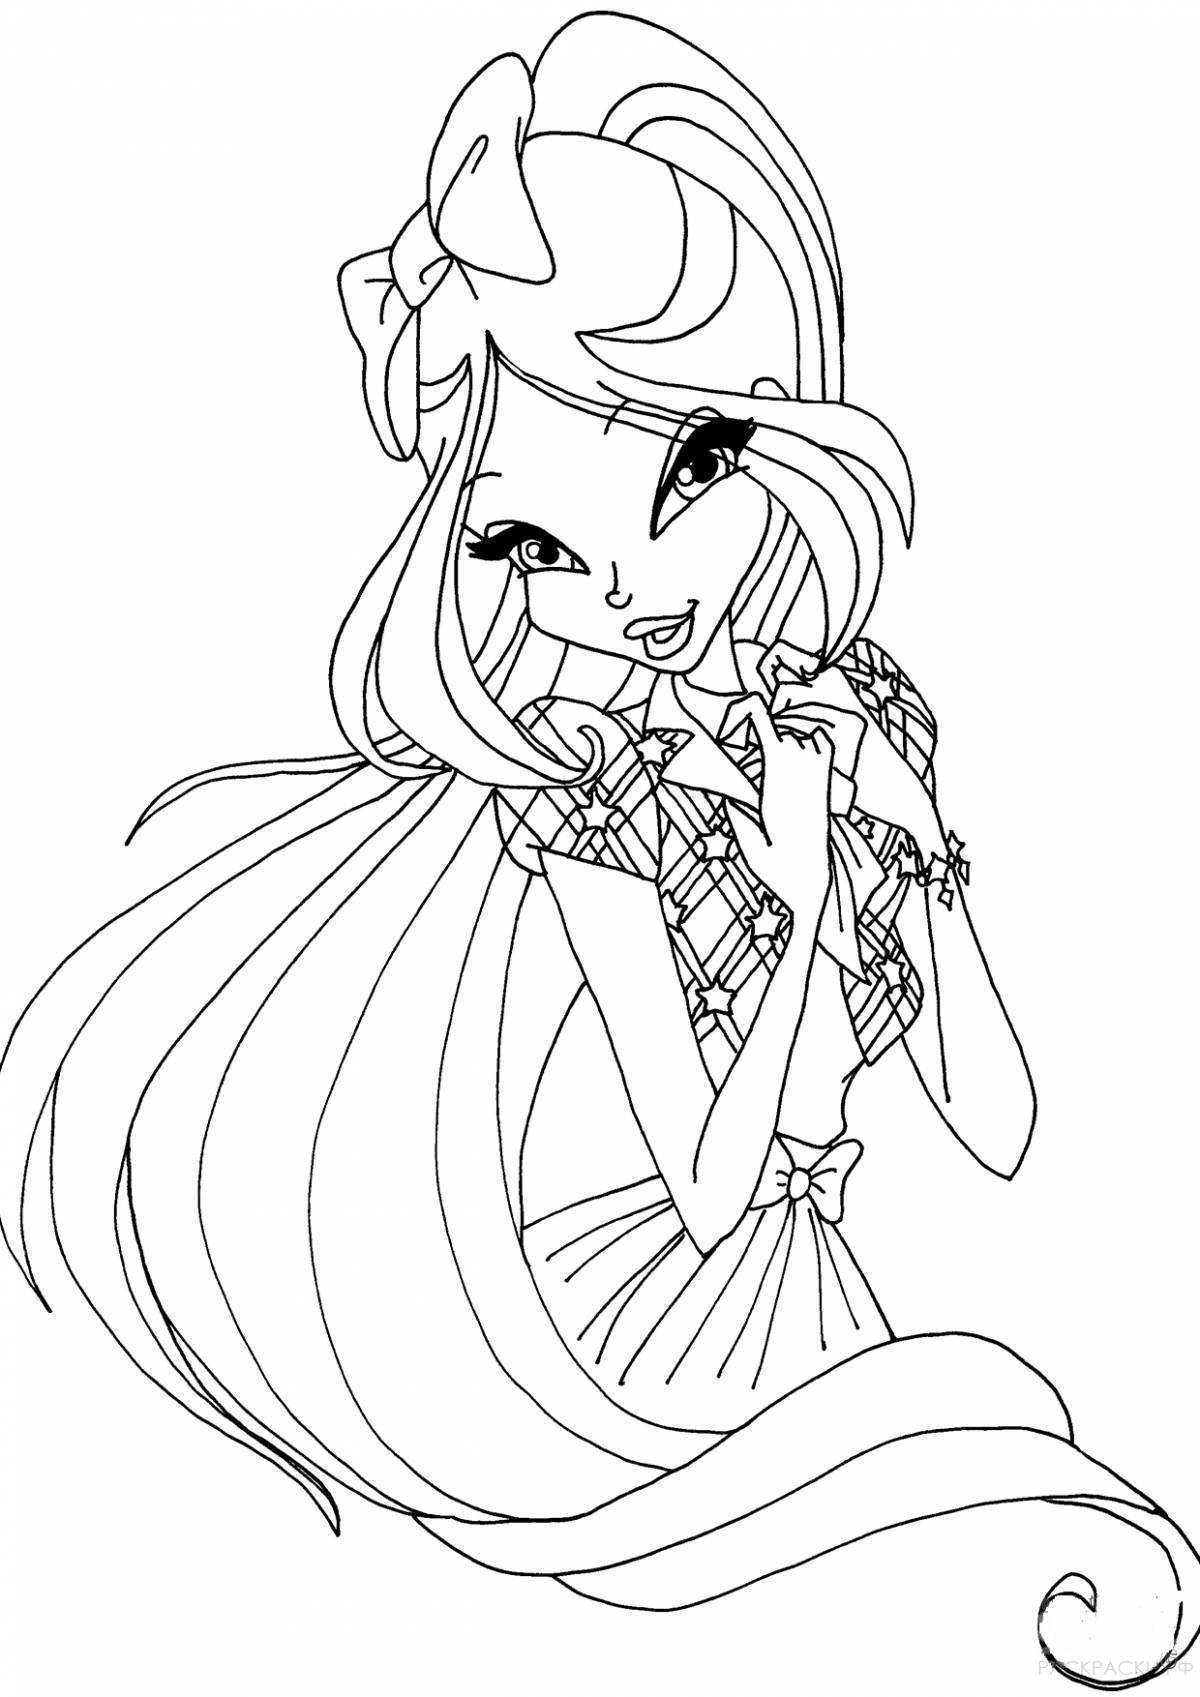 Blissful flora coloring page